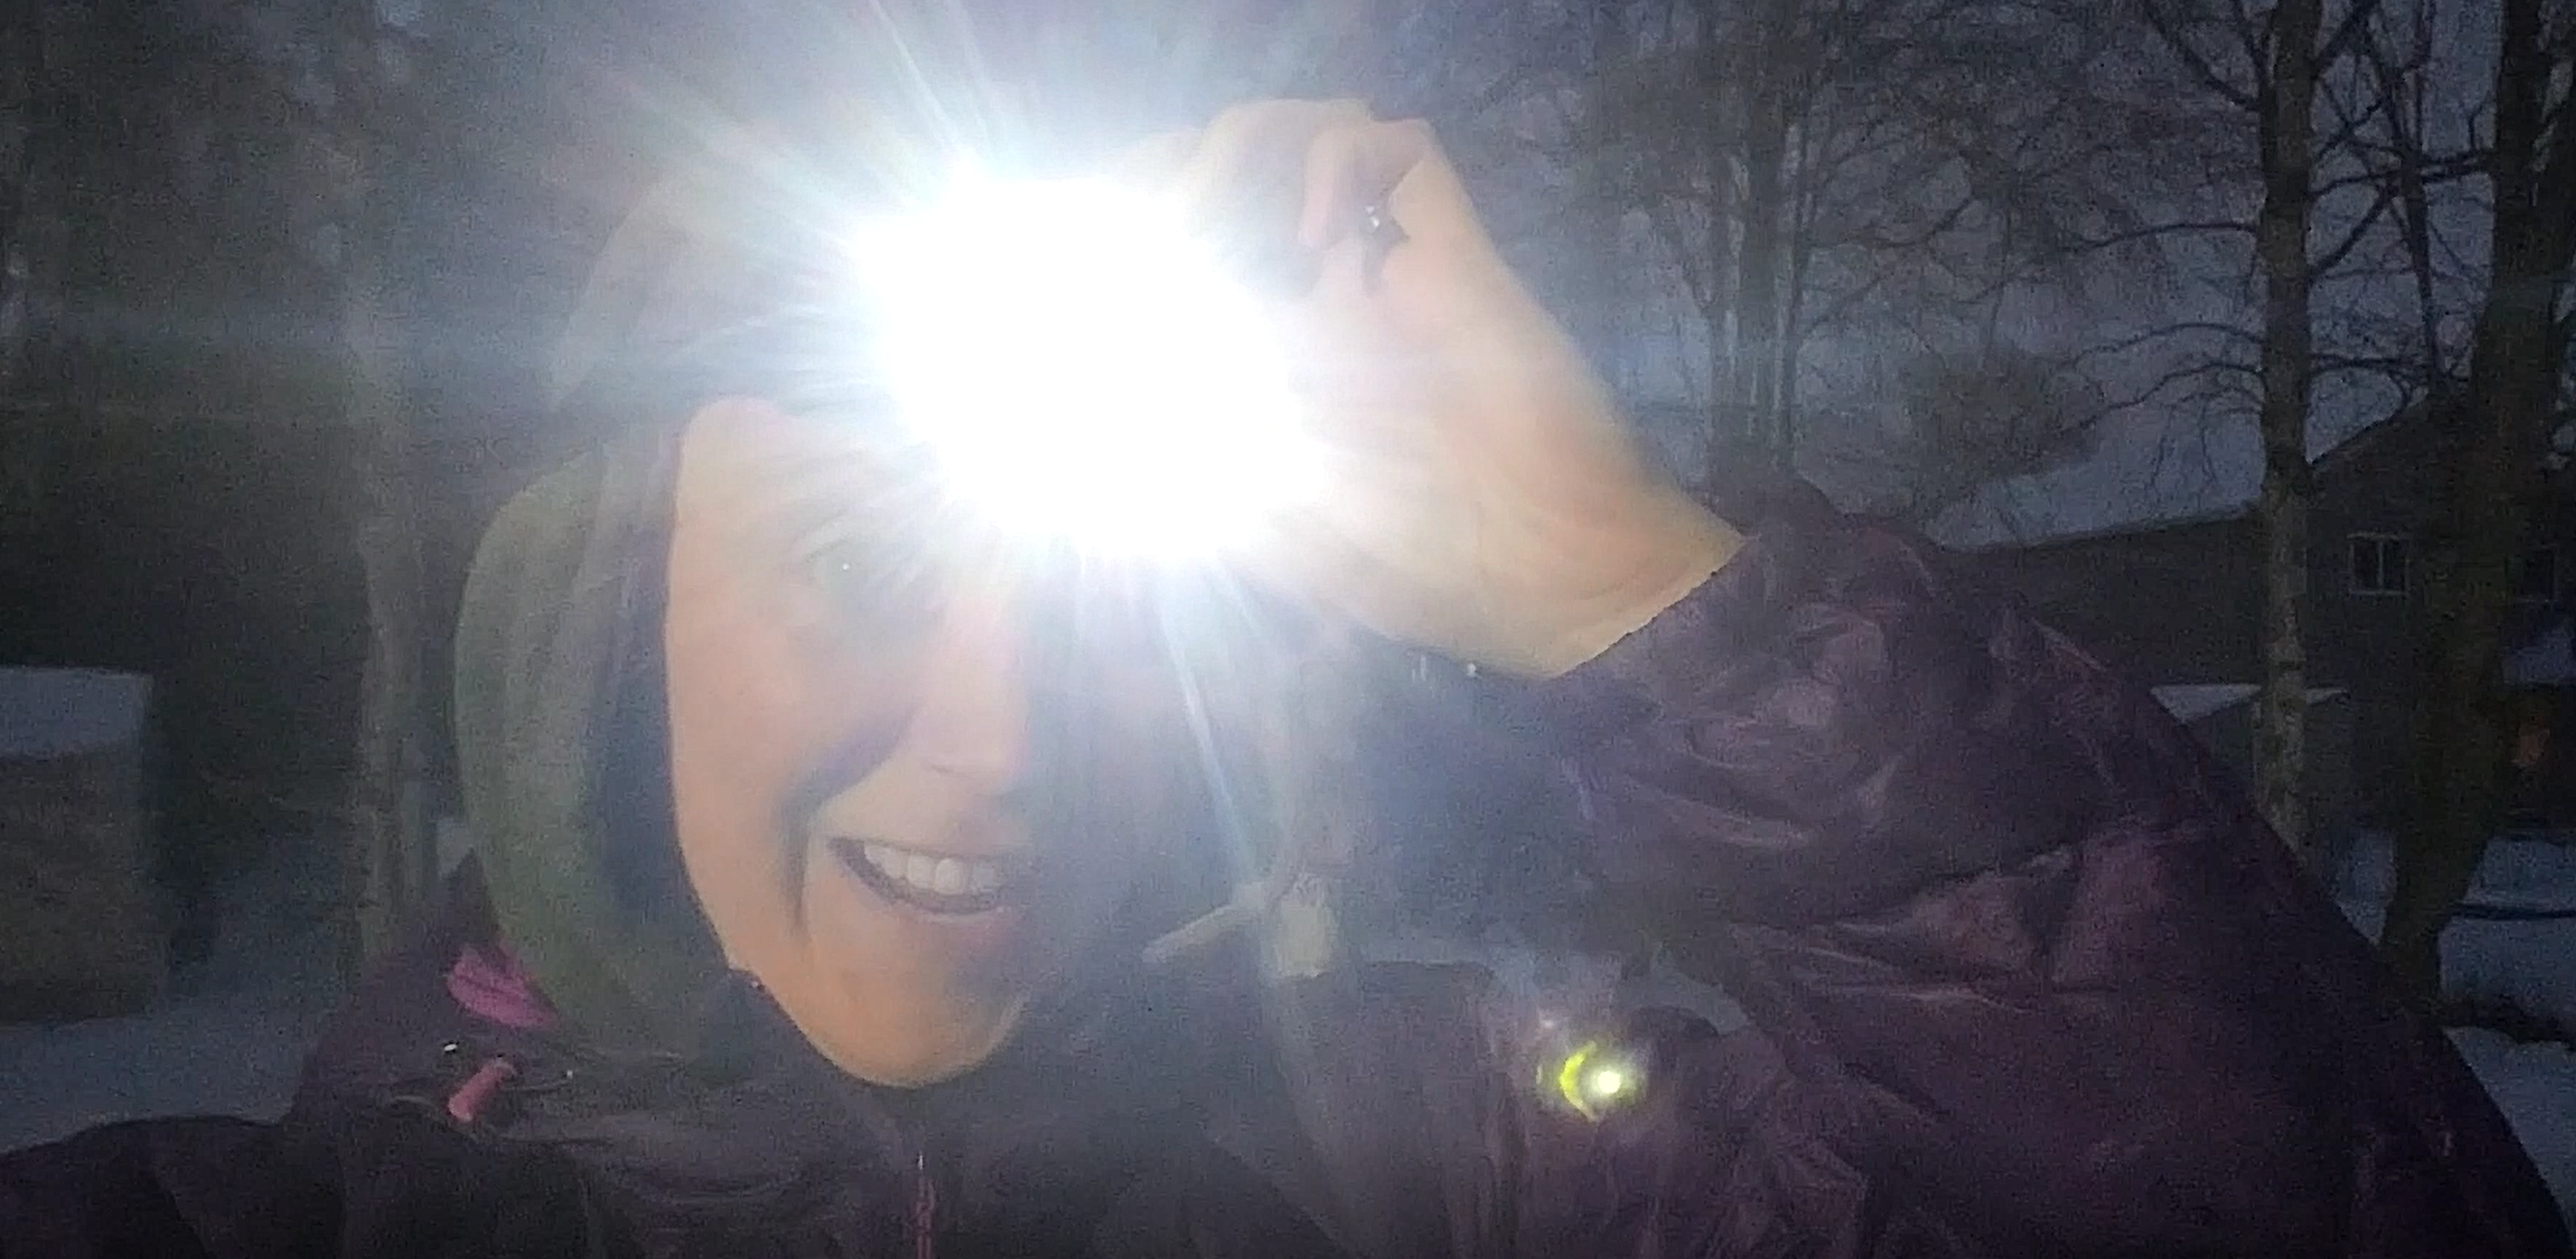 Ashley Taborsky with headlamp in winter